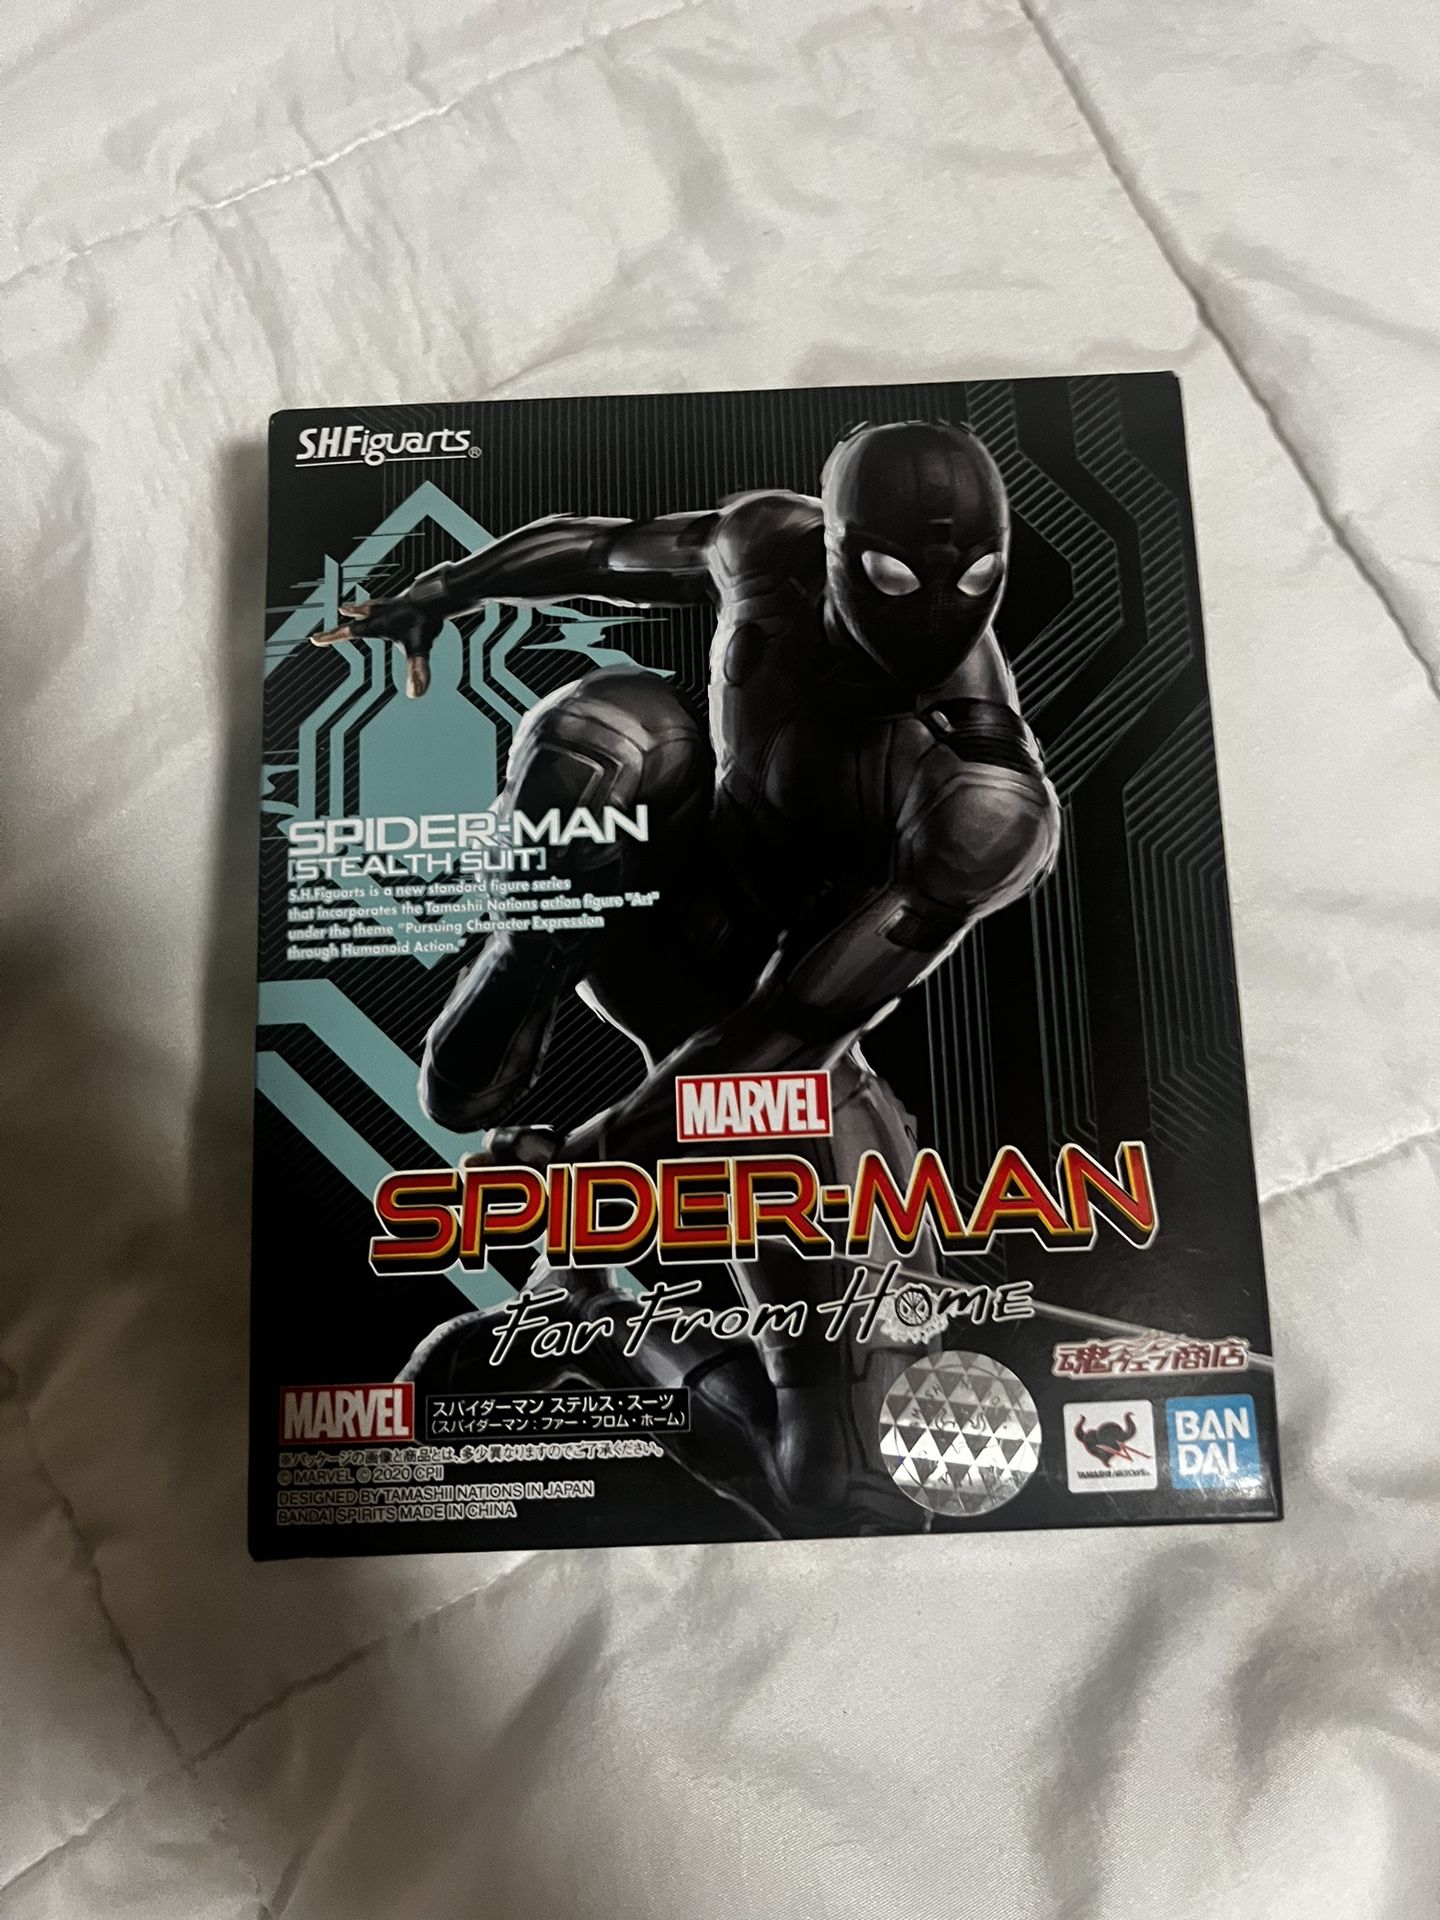 S.H. Figuarts Spider-man Stealth Suit Exclusive Night Monkey